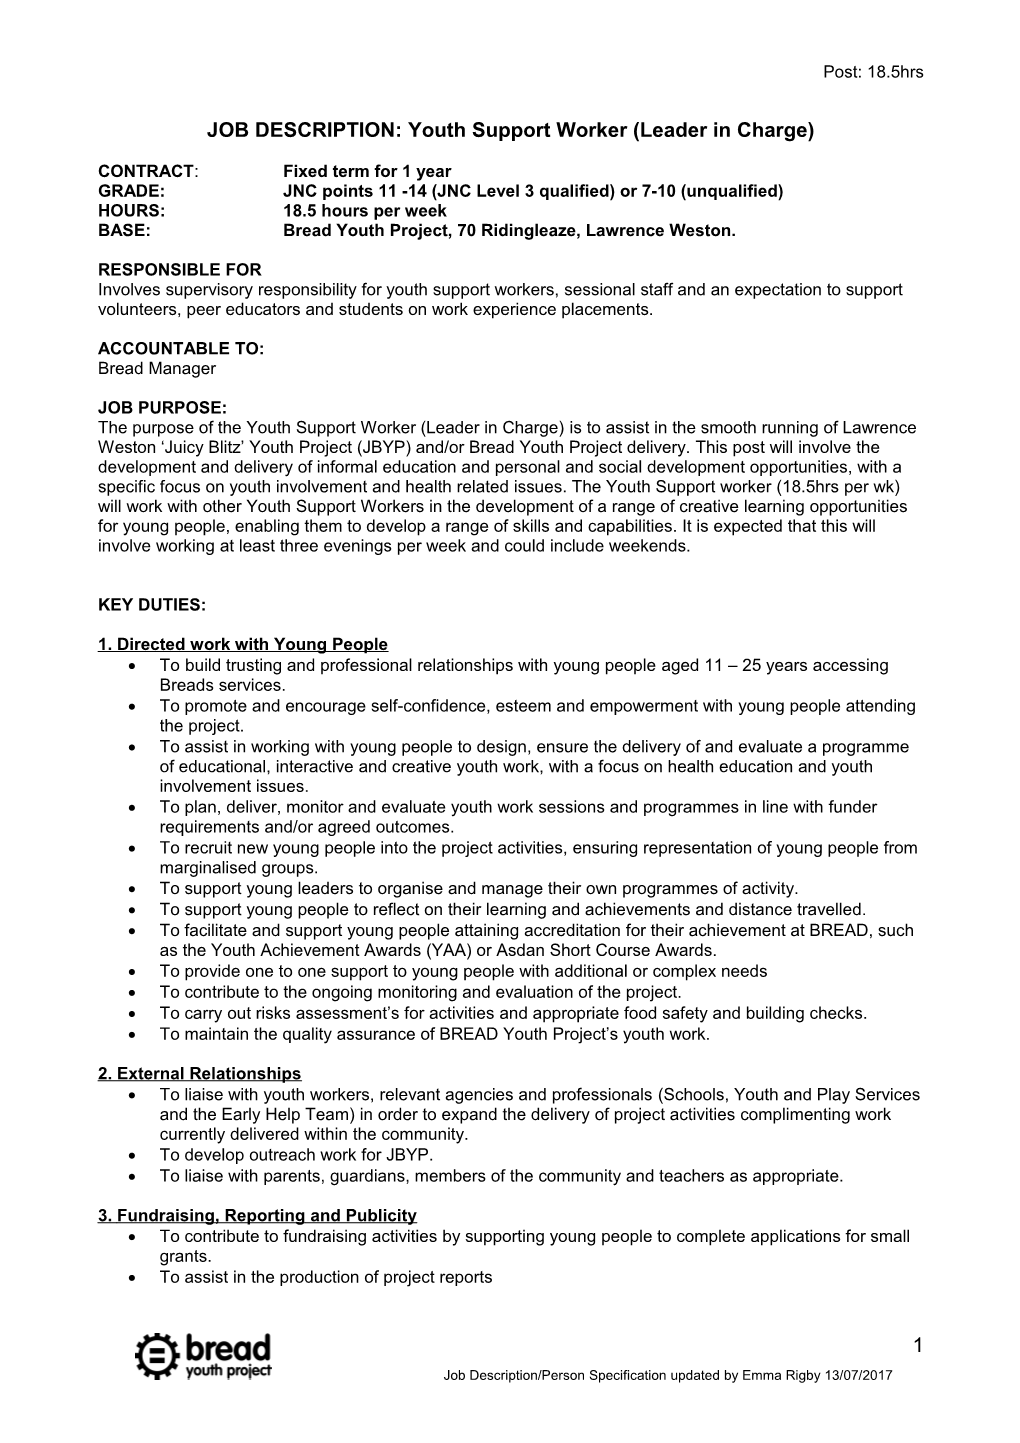 JOB DESCRIPTION: Youth Support Worker (Leader in Charge)